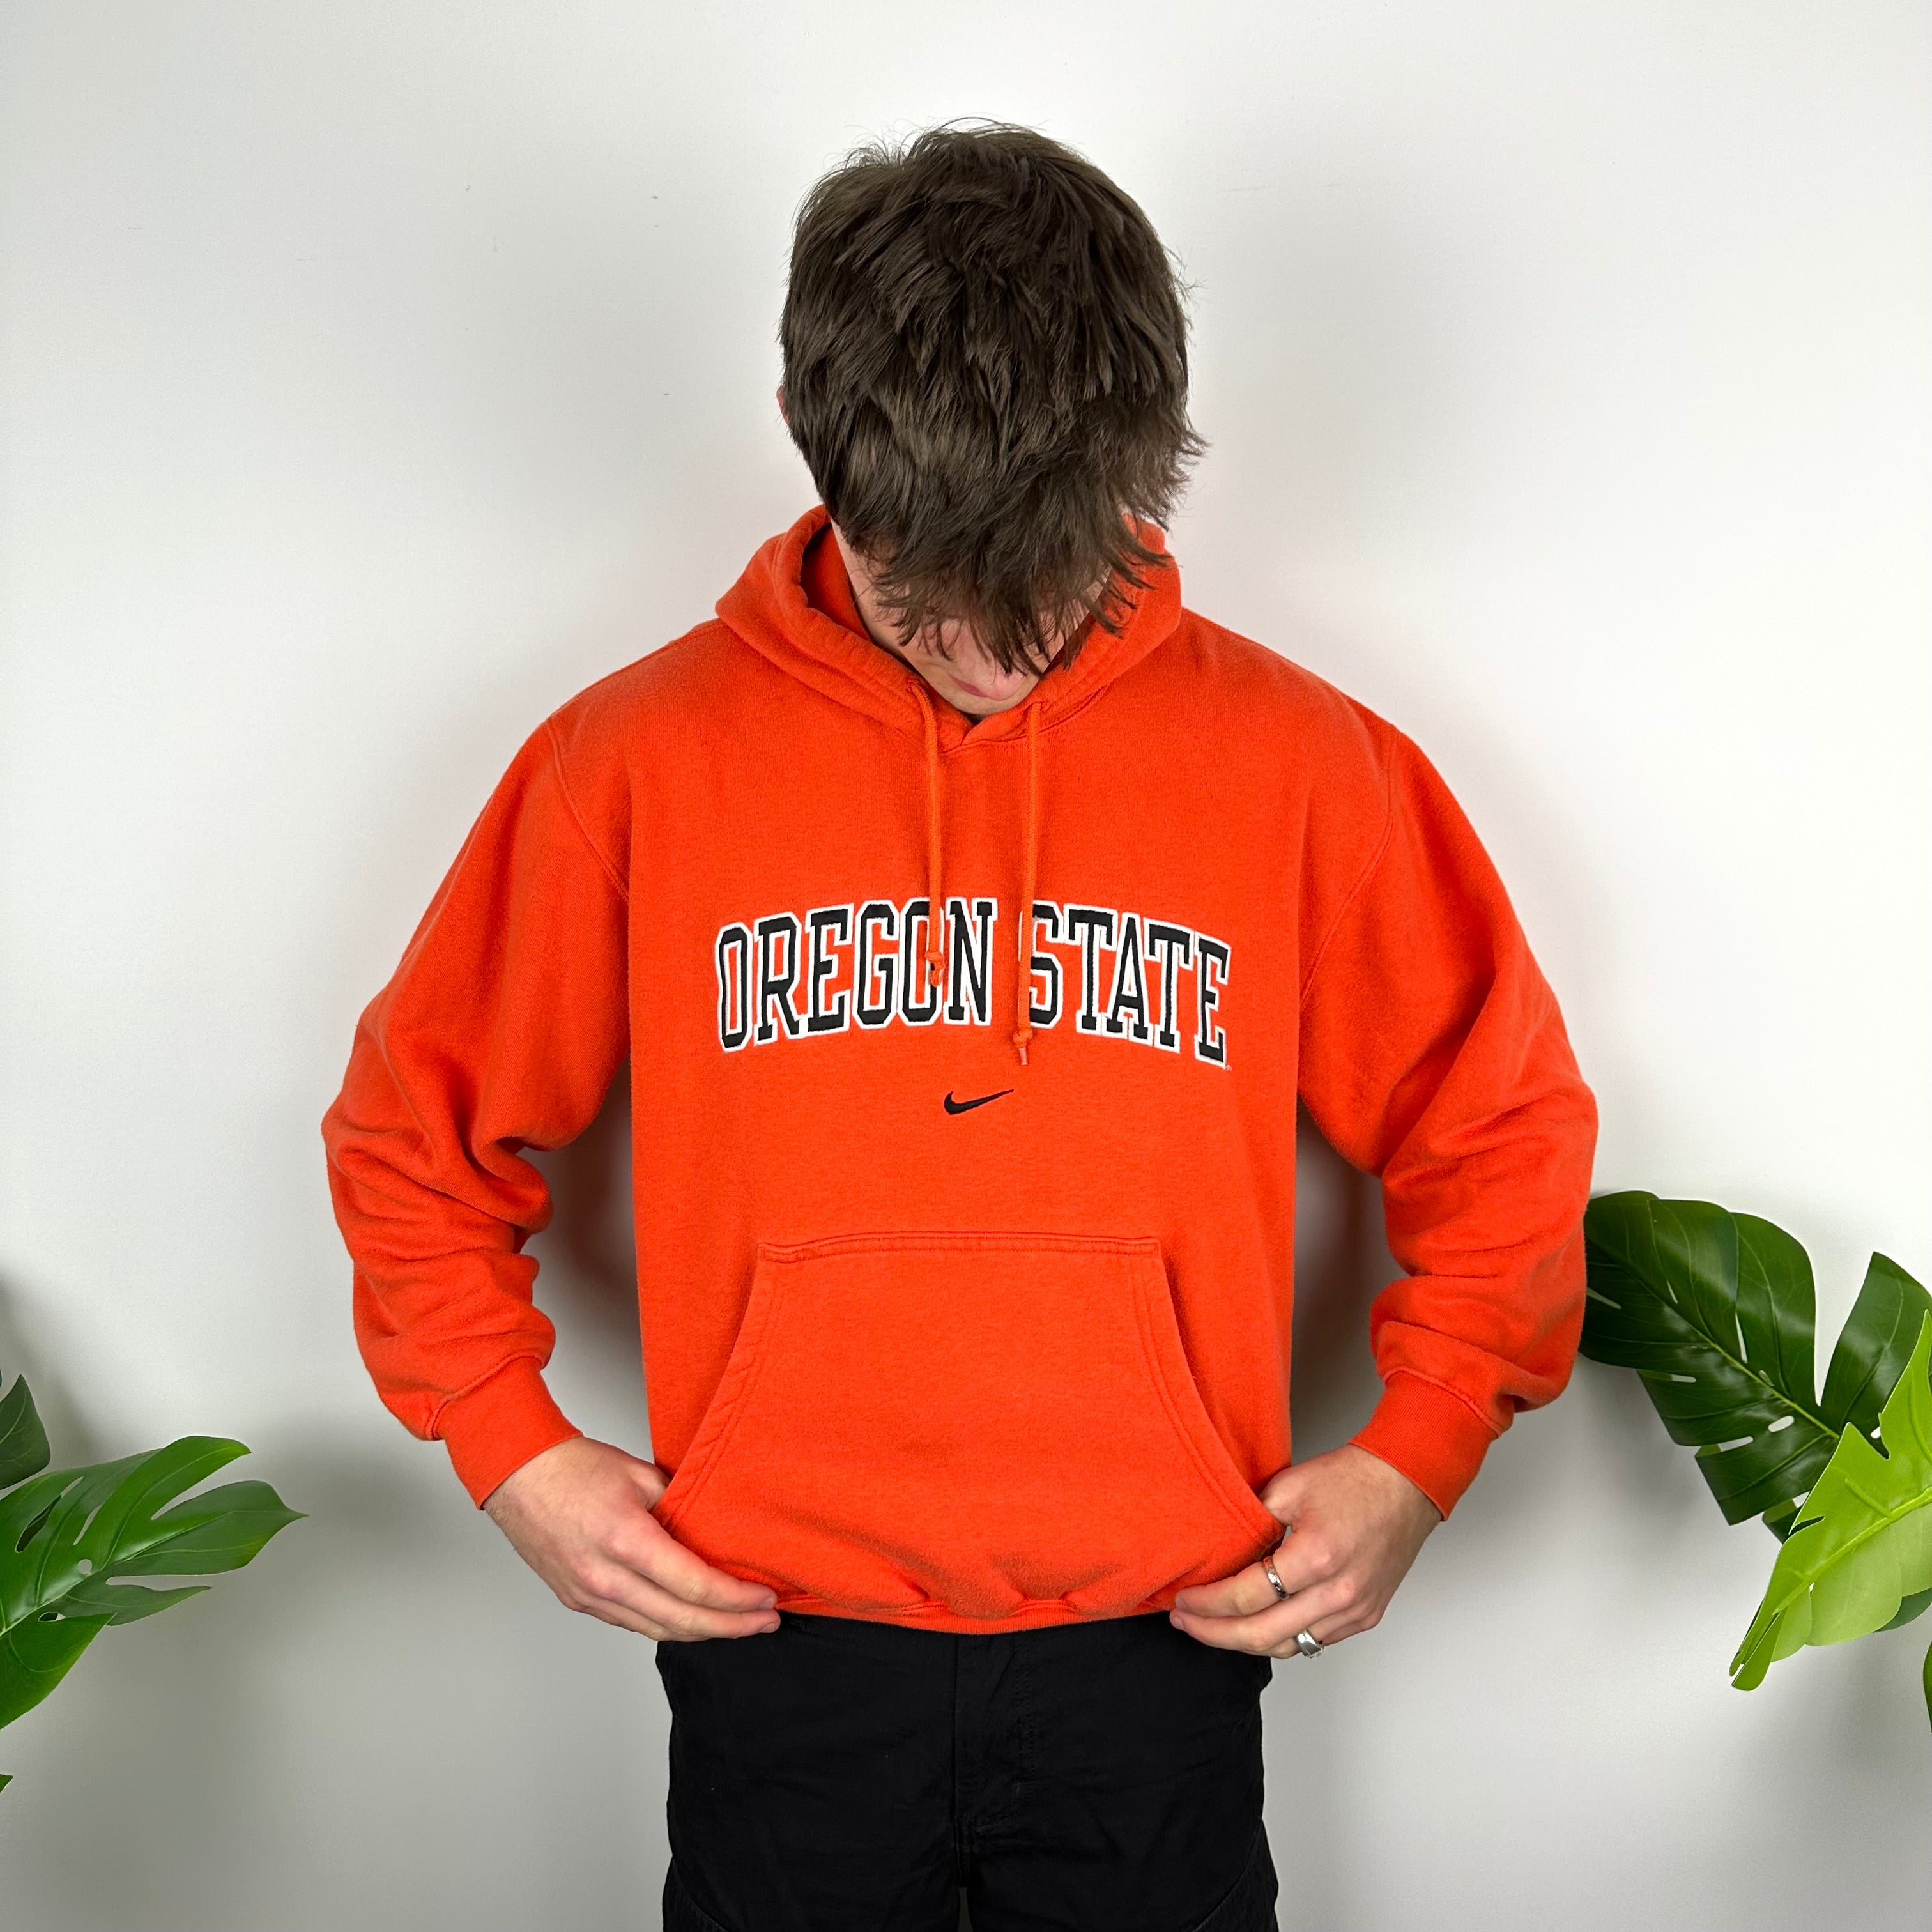 Nike x Oregon State Orange Embroidered Spell Out Hoodie (S)